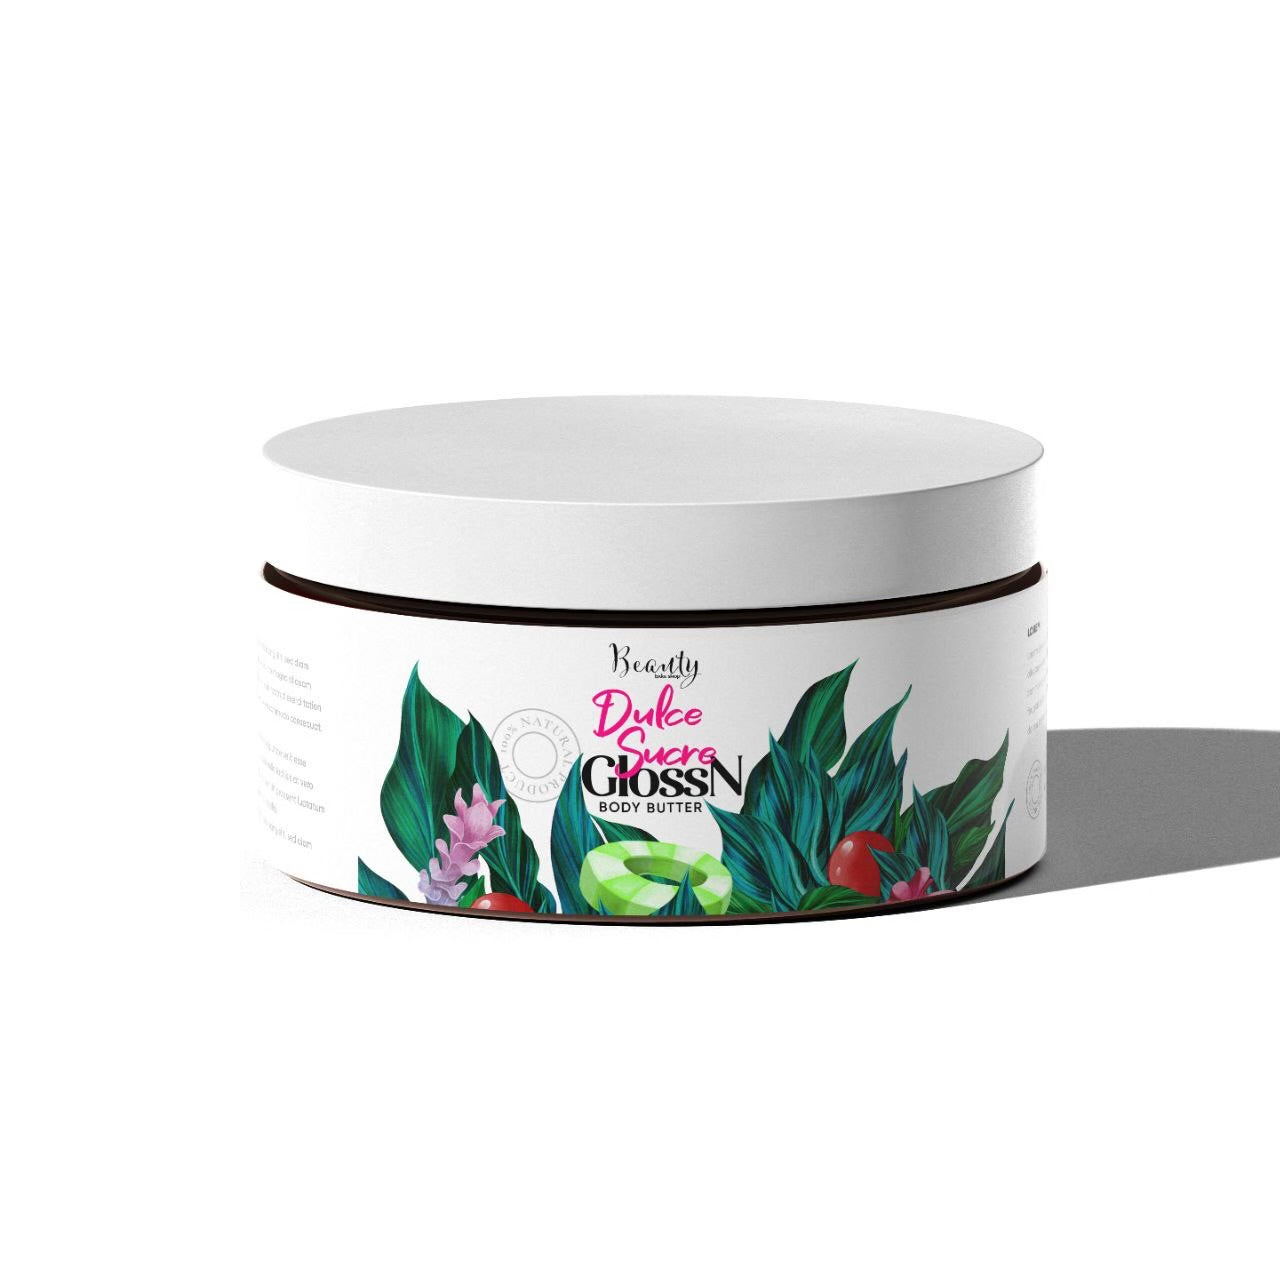 Delish Sucre' Body Butter